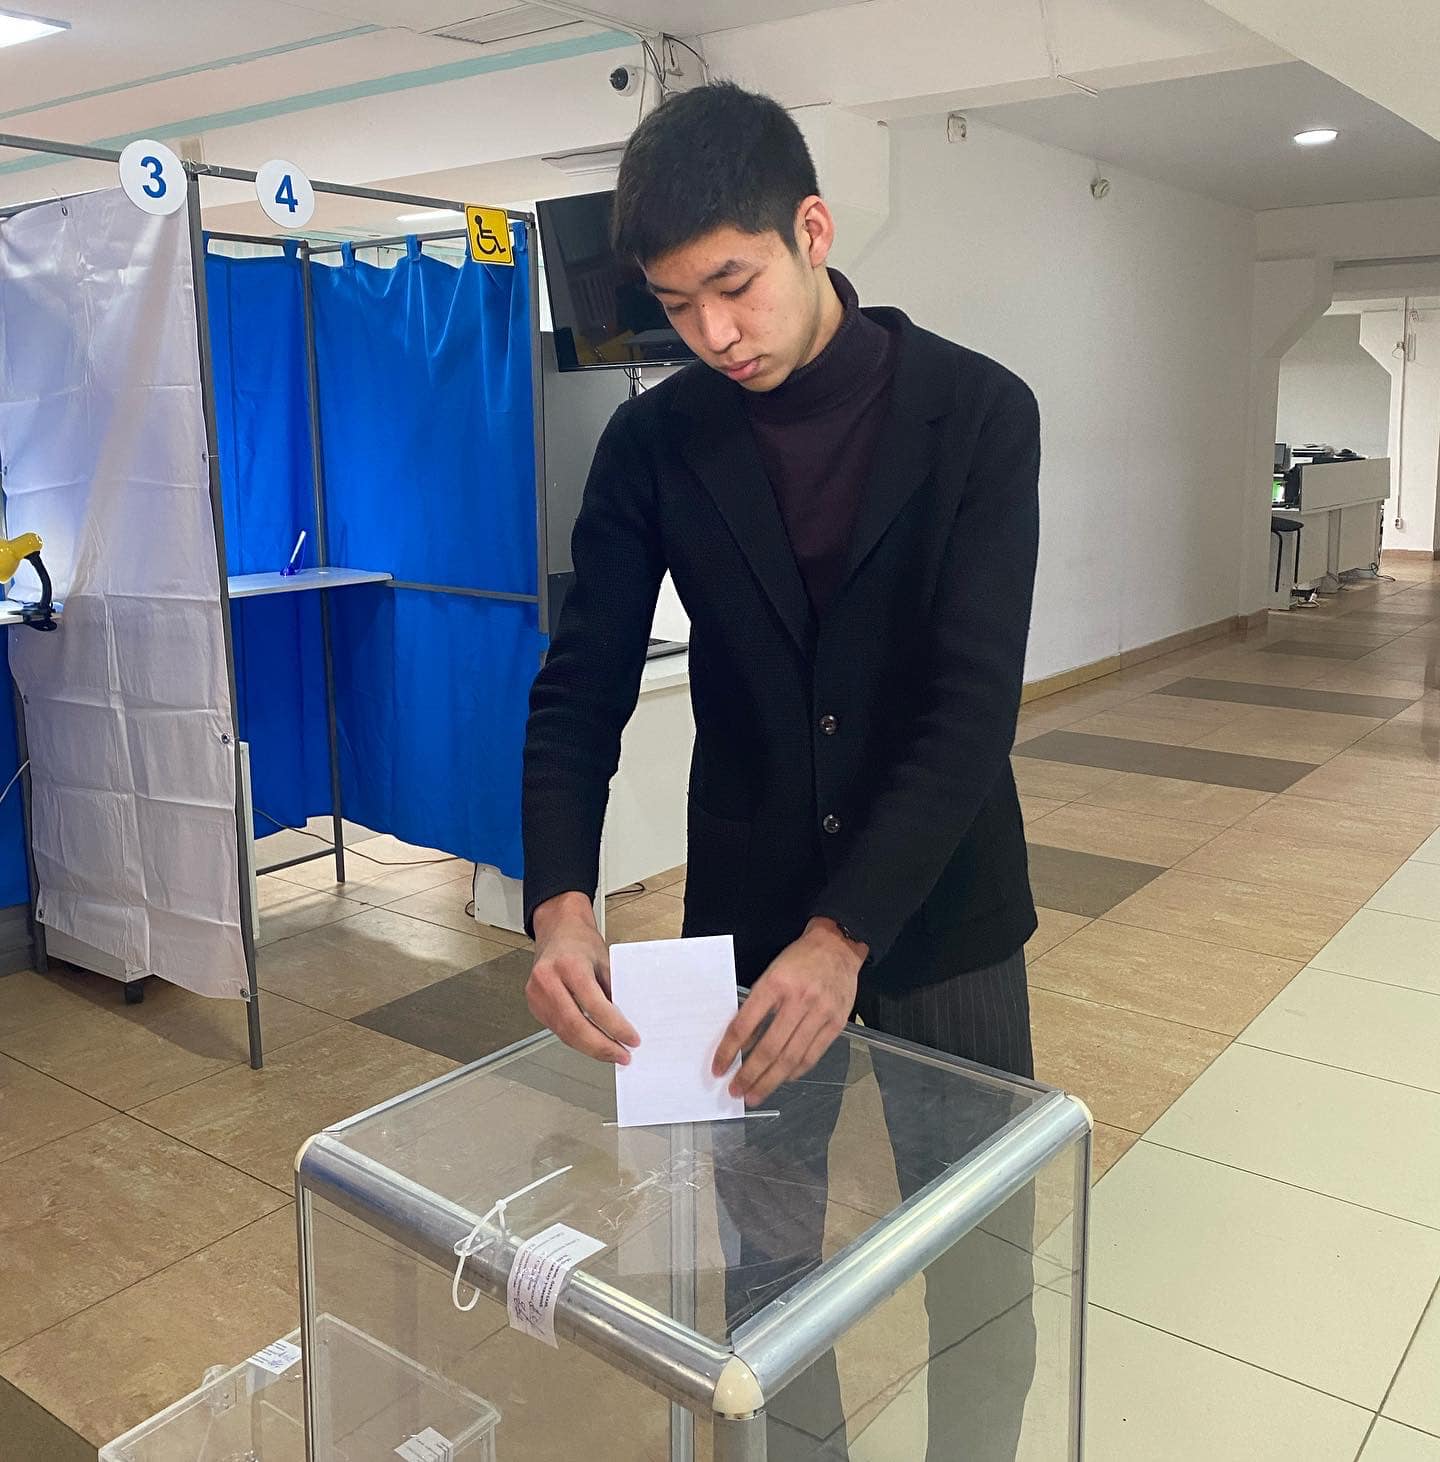 In the West Kazakhstan region, 18-year-old Uralians took part in the presidential elections for the first time